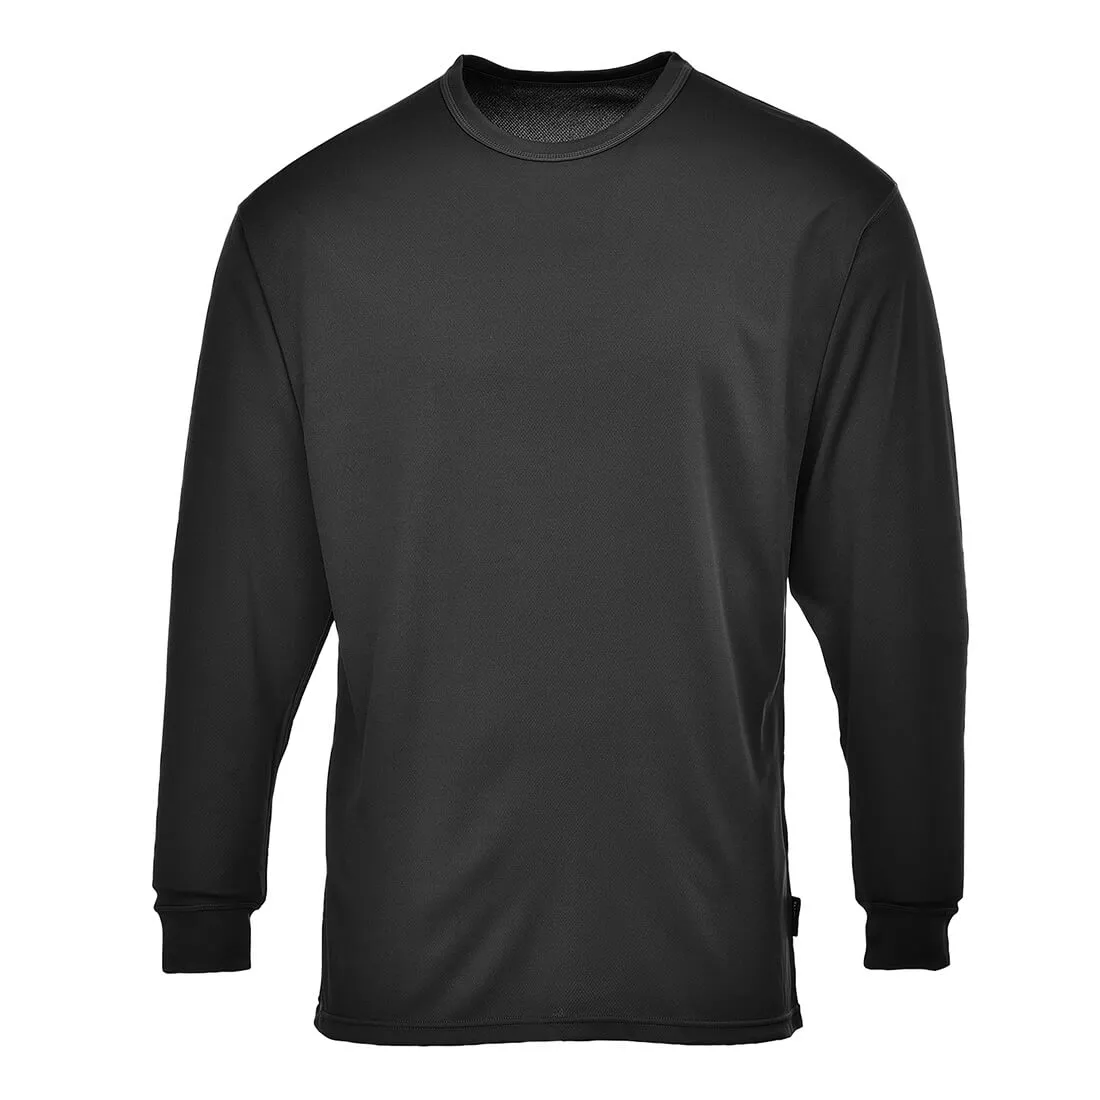 Base Layer Thermal Top Long Sleeve - Black, L